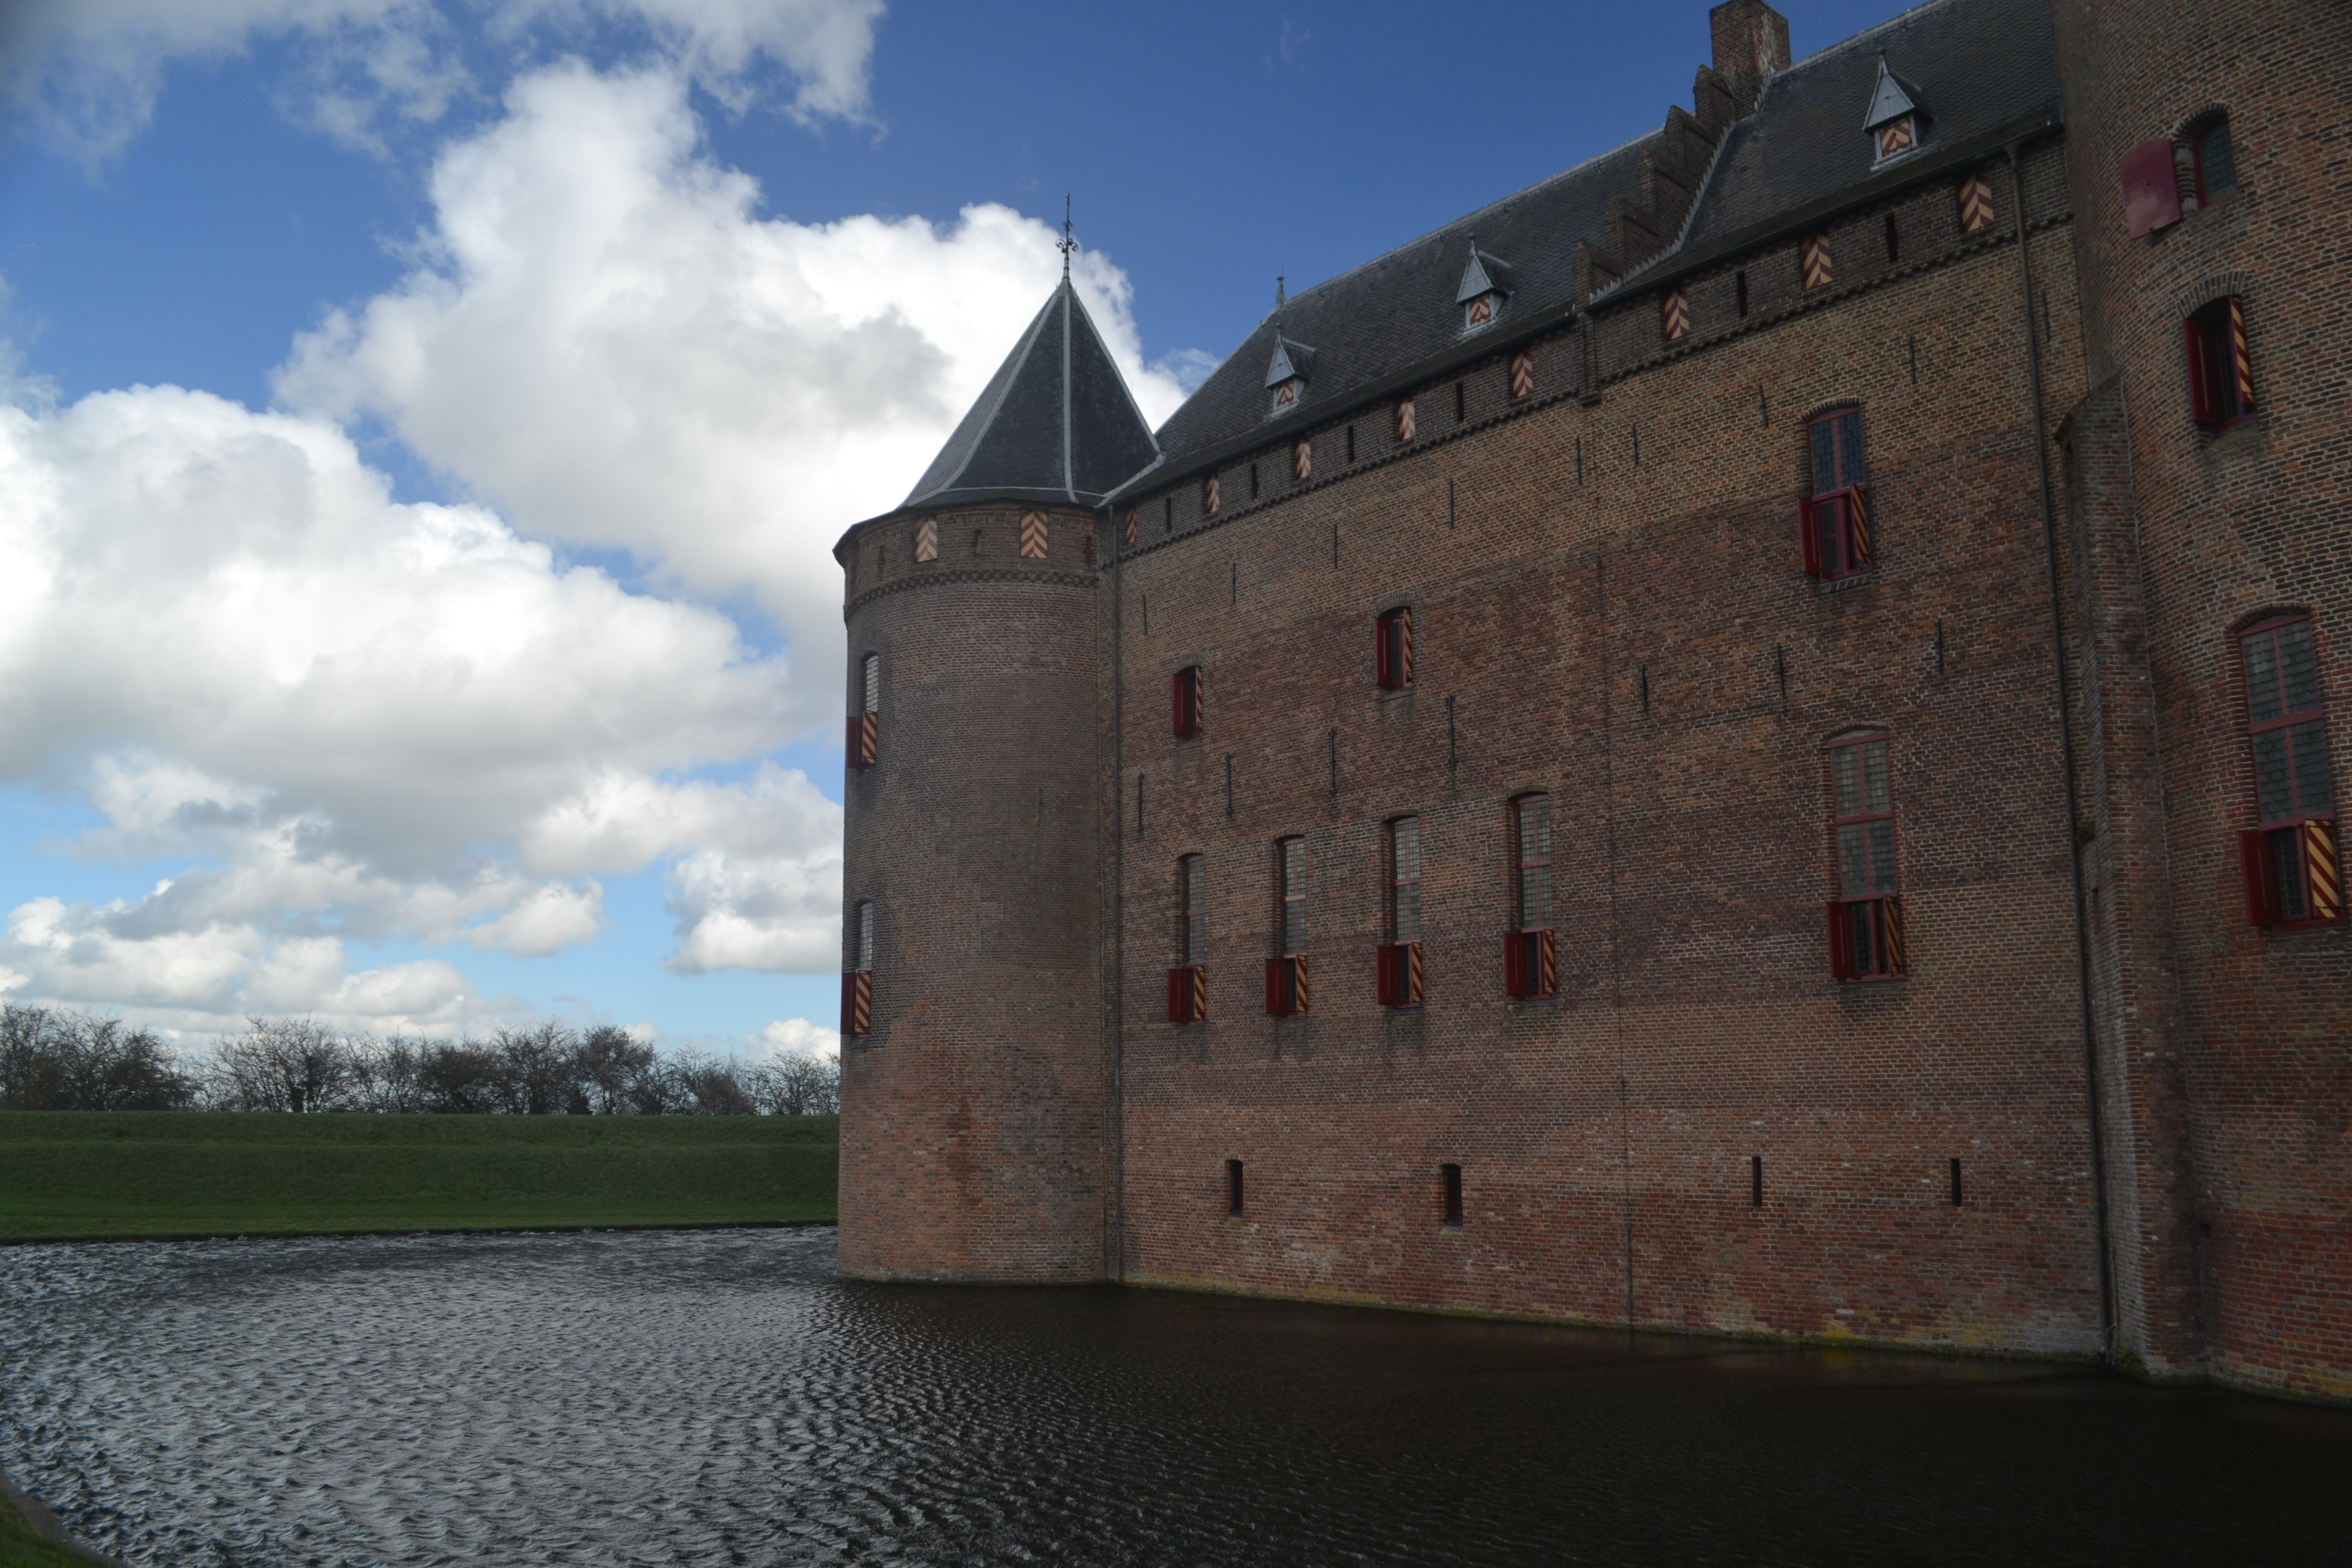 A castle of red bricks rises from a moat.  Red and yellow shutters decorate the windows.